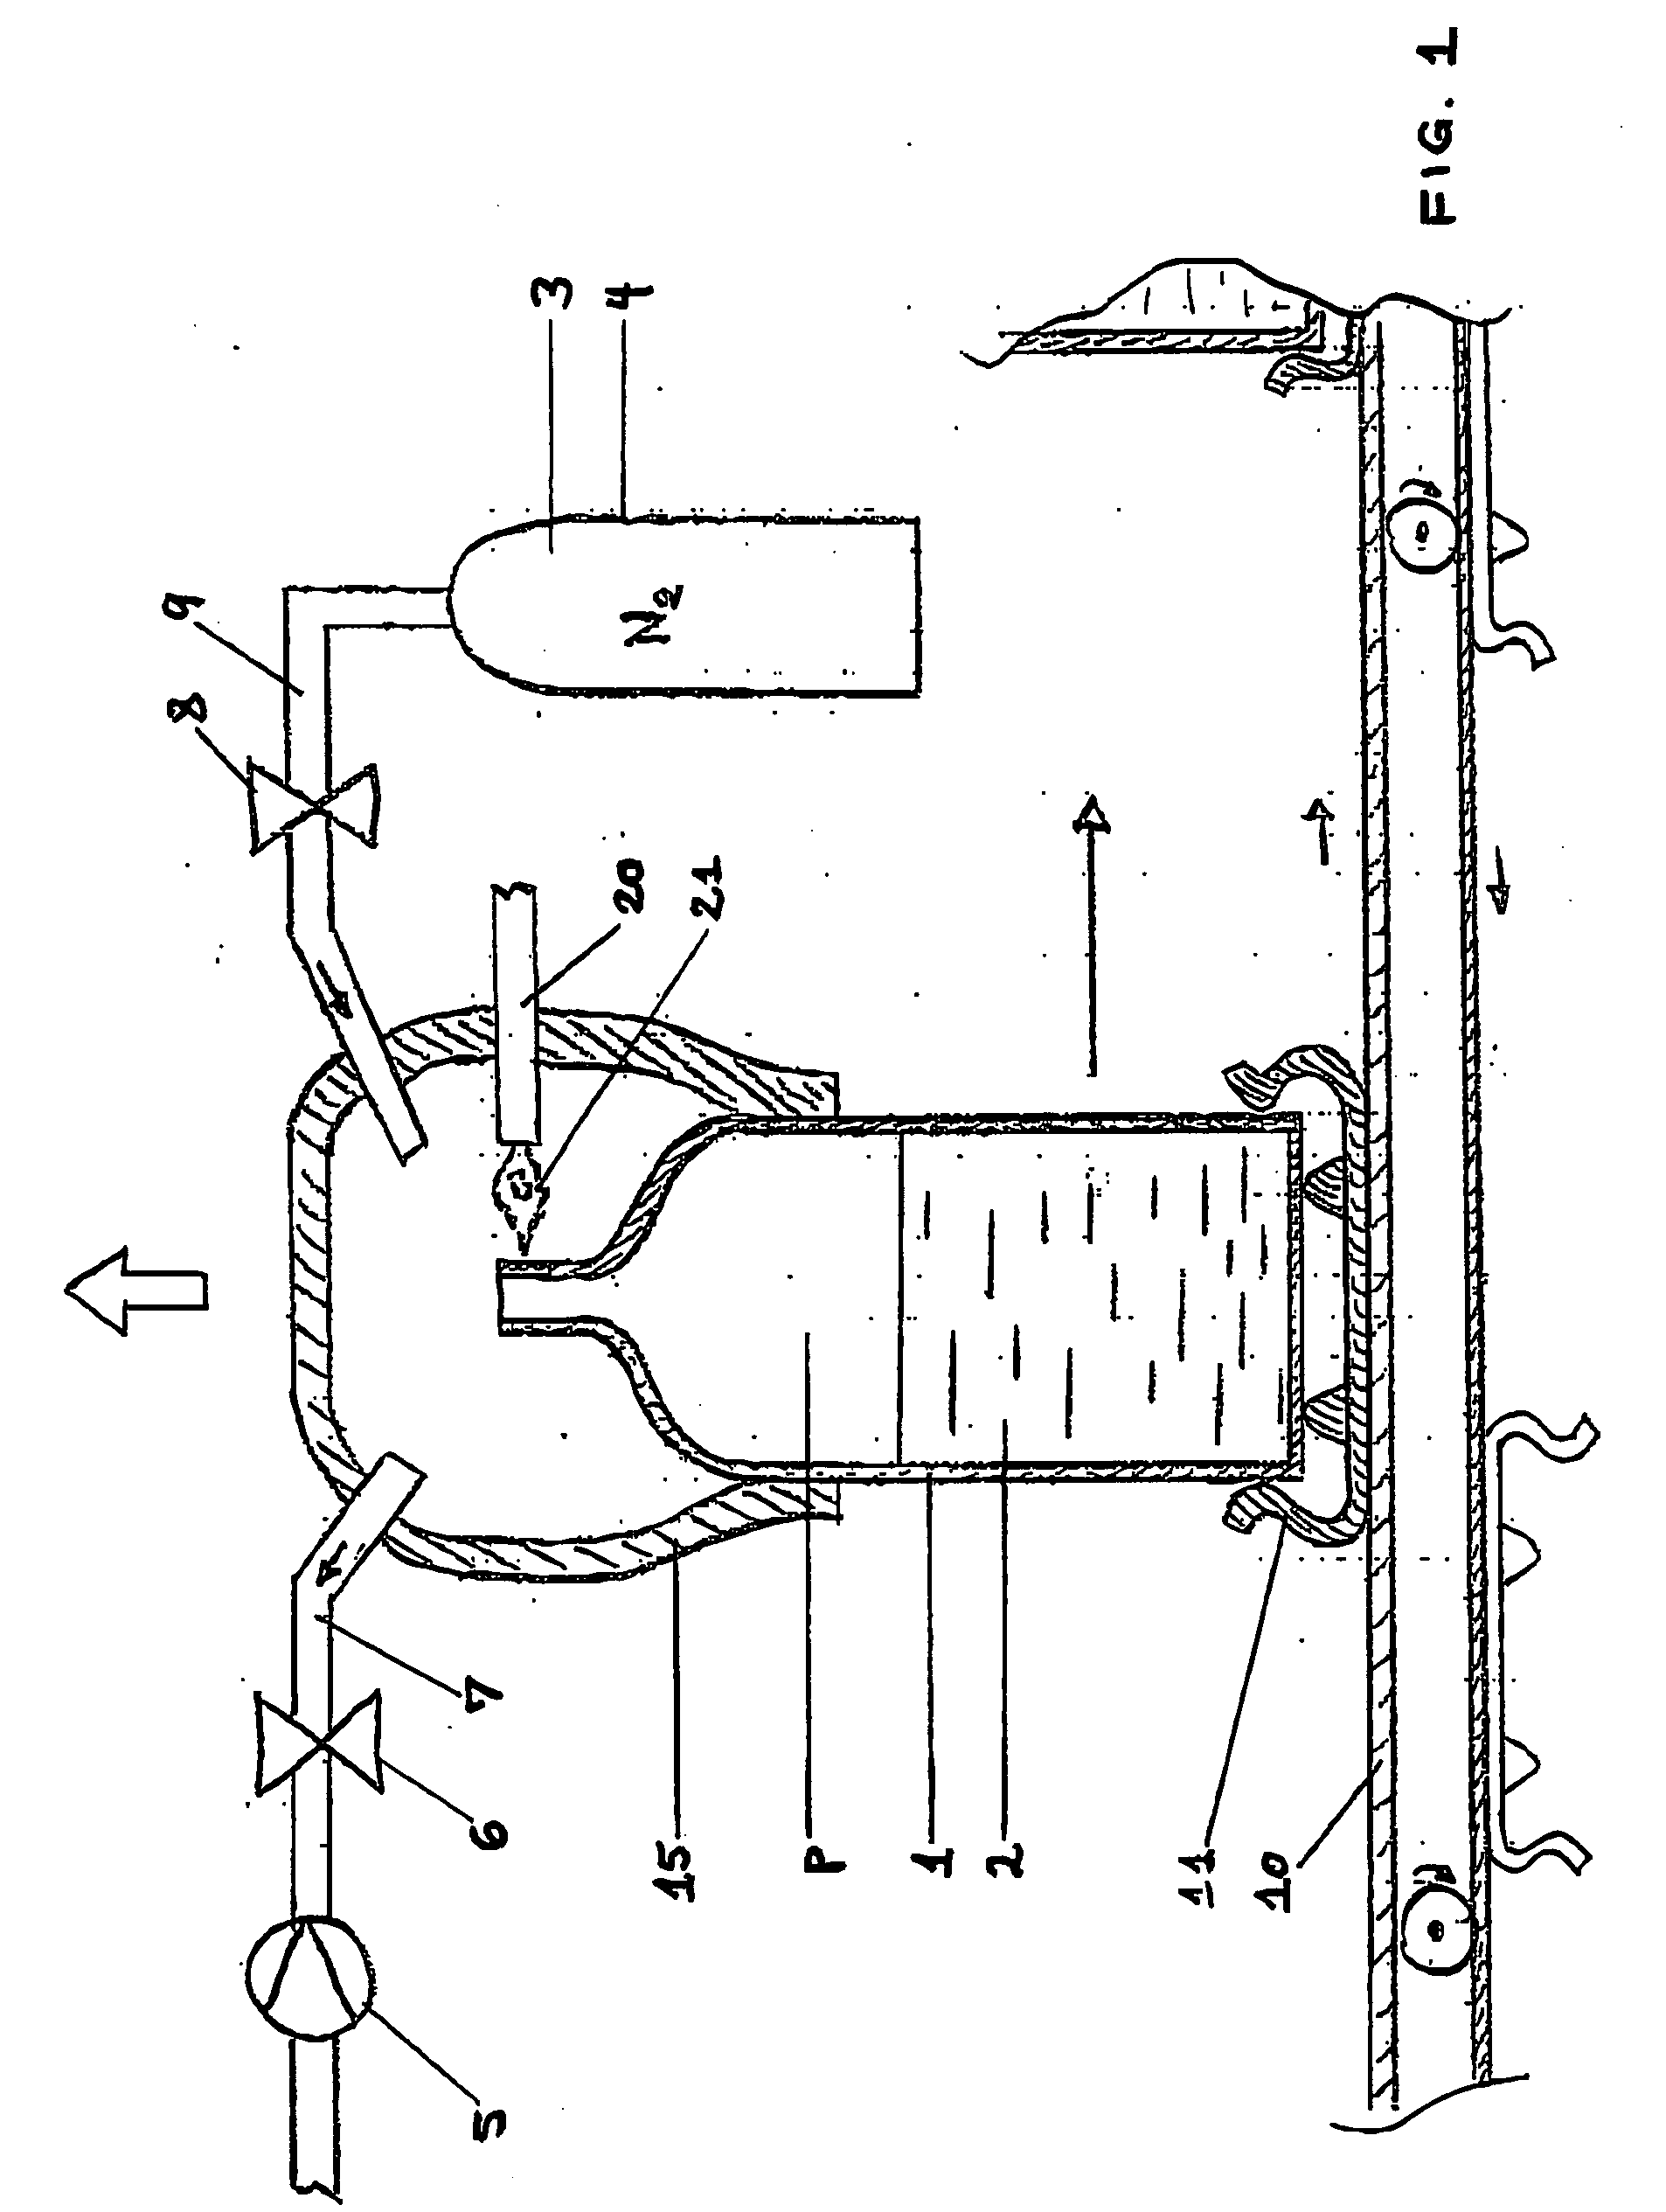 Method and apparatus for cleaning containers to be sealed and containing a filler from oxygen gas